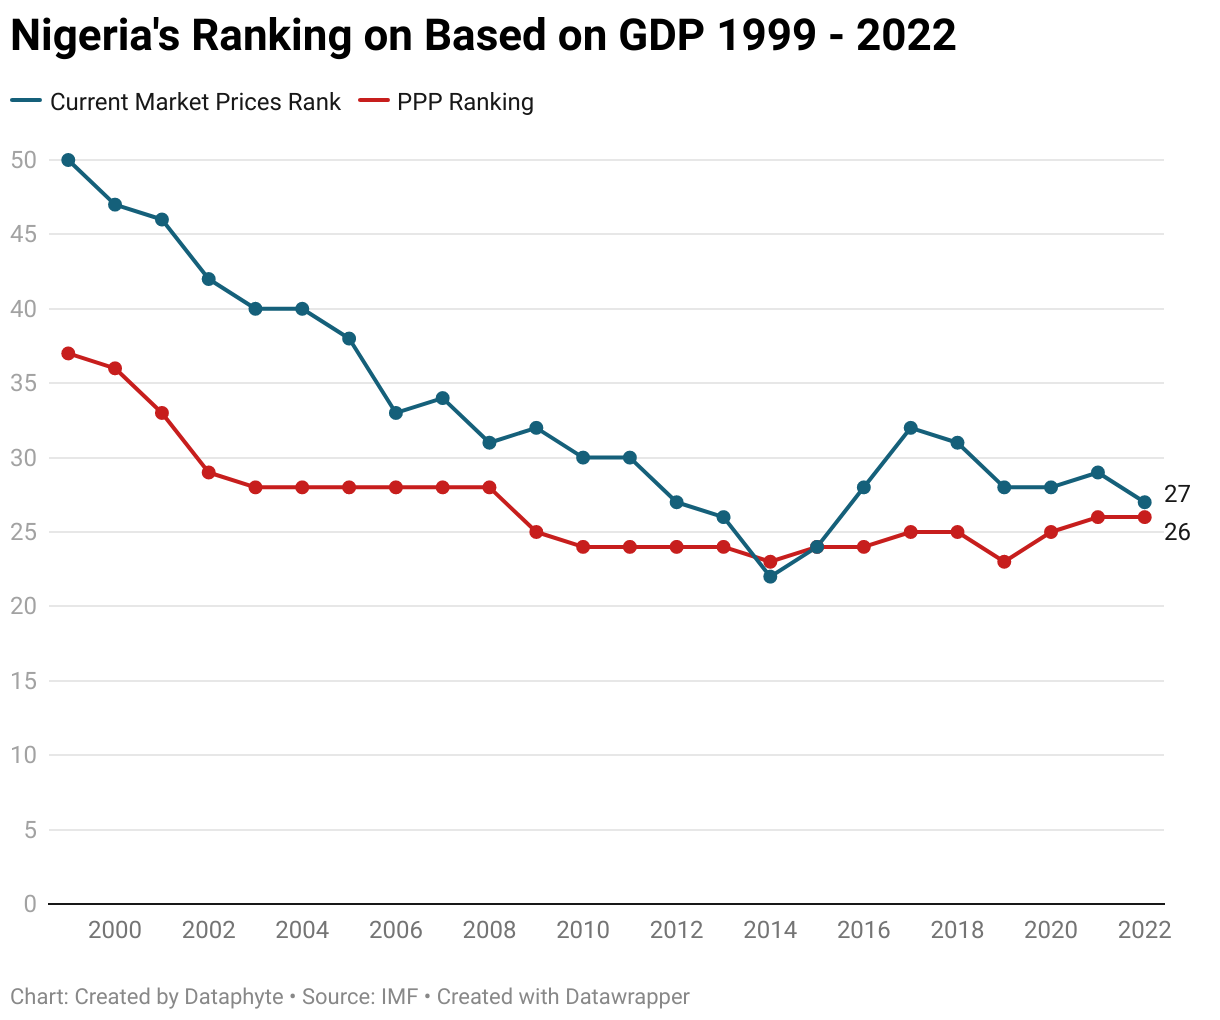 A line graph showing Nigeria's ranking on IMF based on GDP